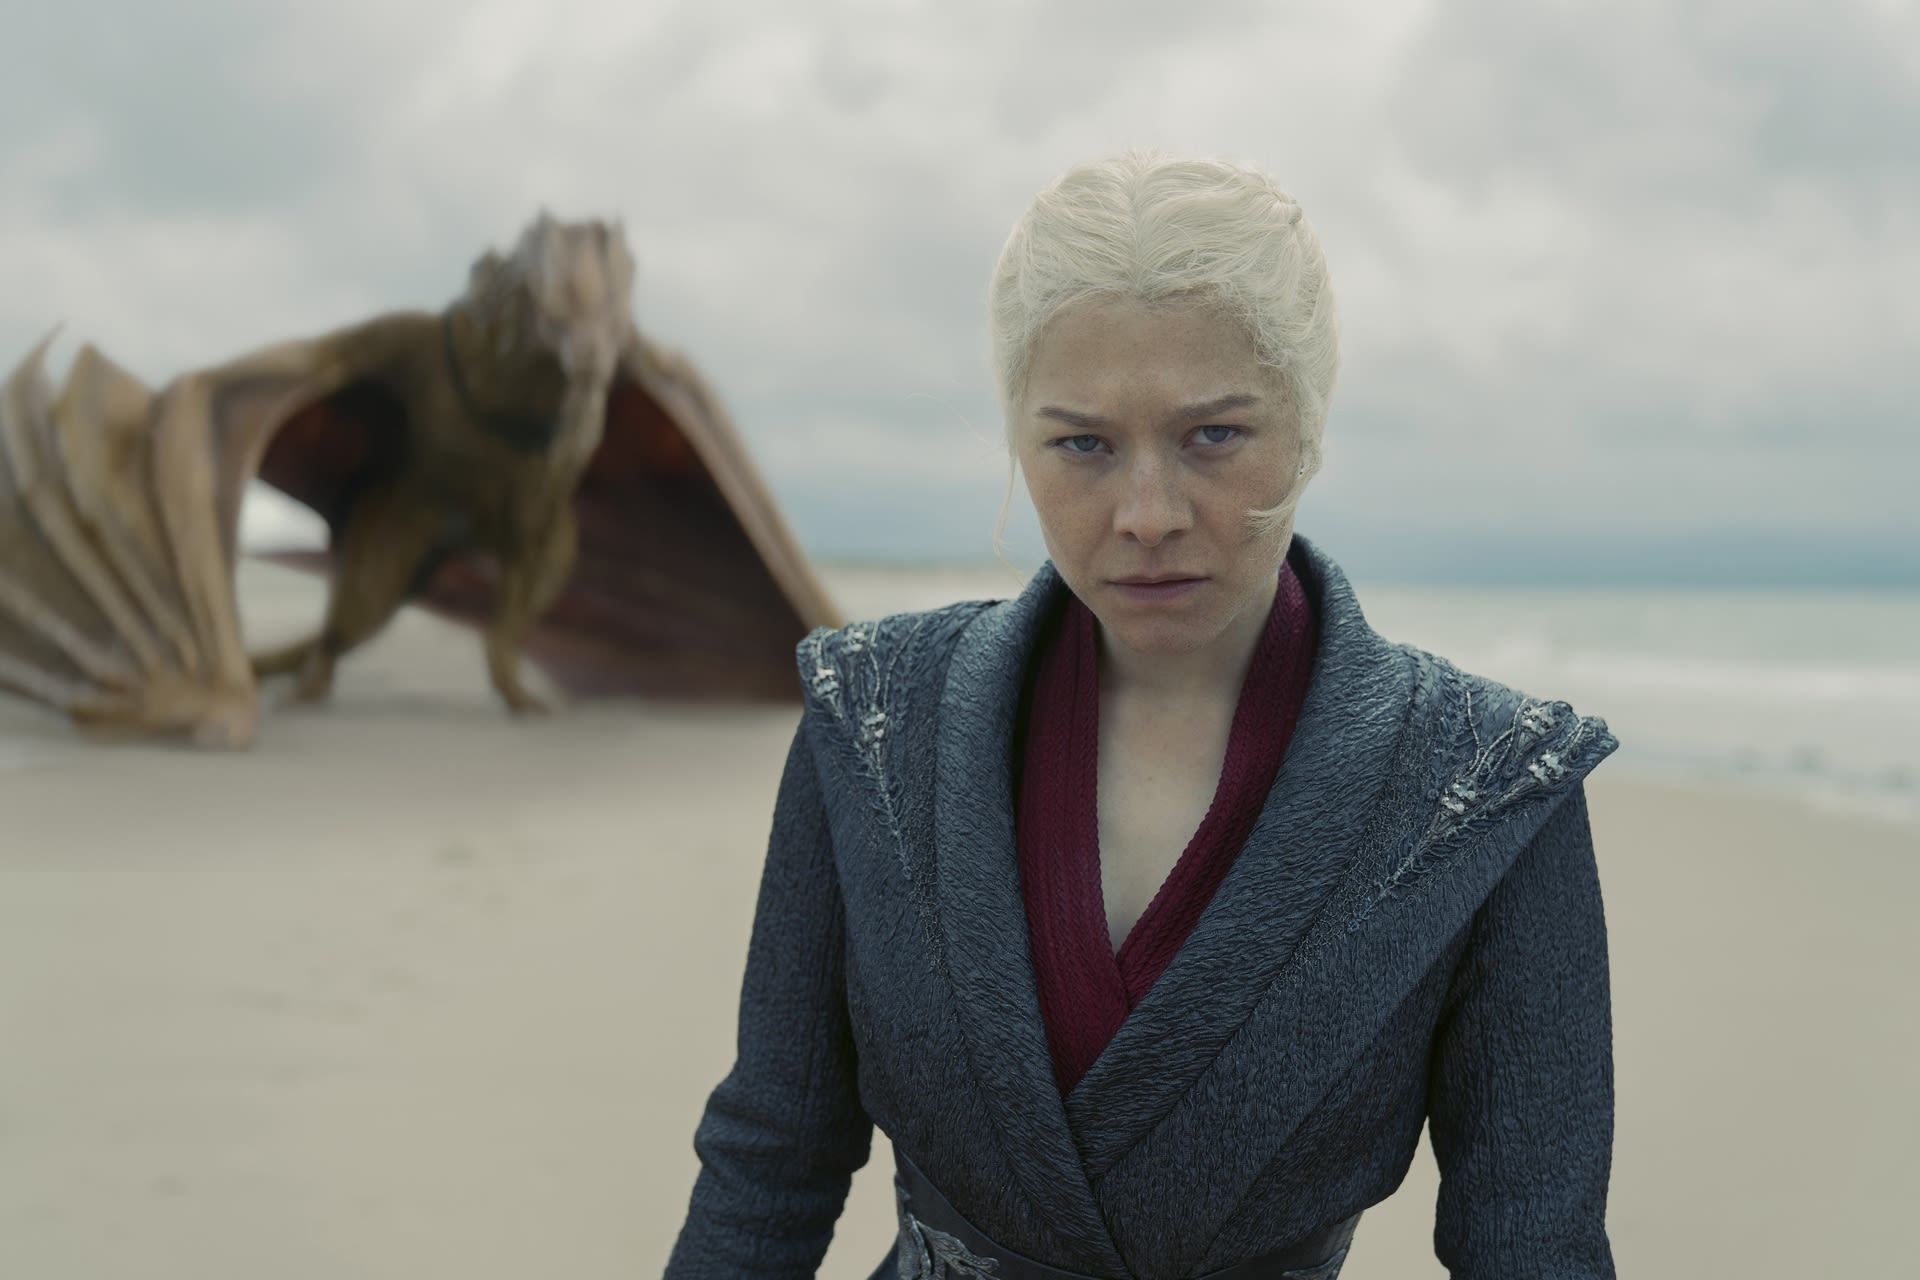 ‘House of the Dragon’ Season 2 Finale Leaks on TikTok and Twitter/X, HBO Blames ‘International Third-Party Distributor’